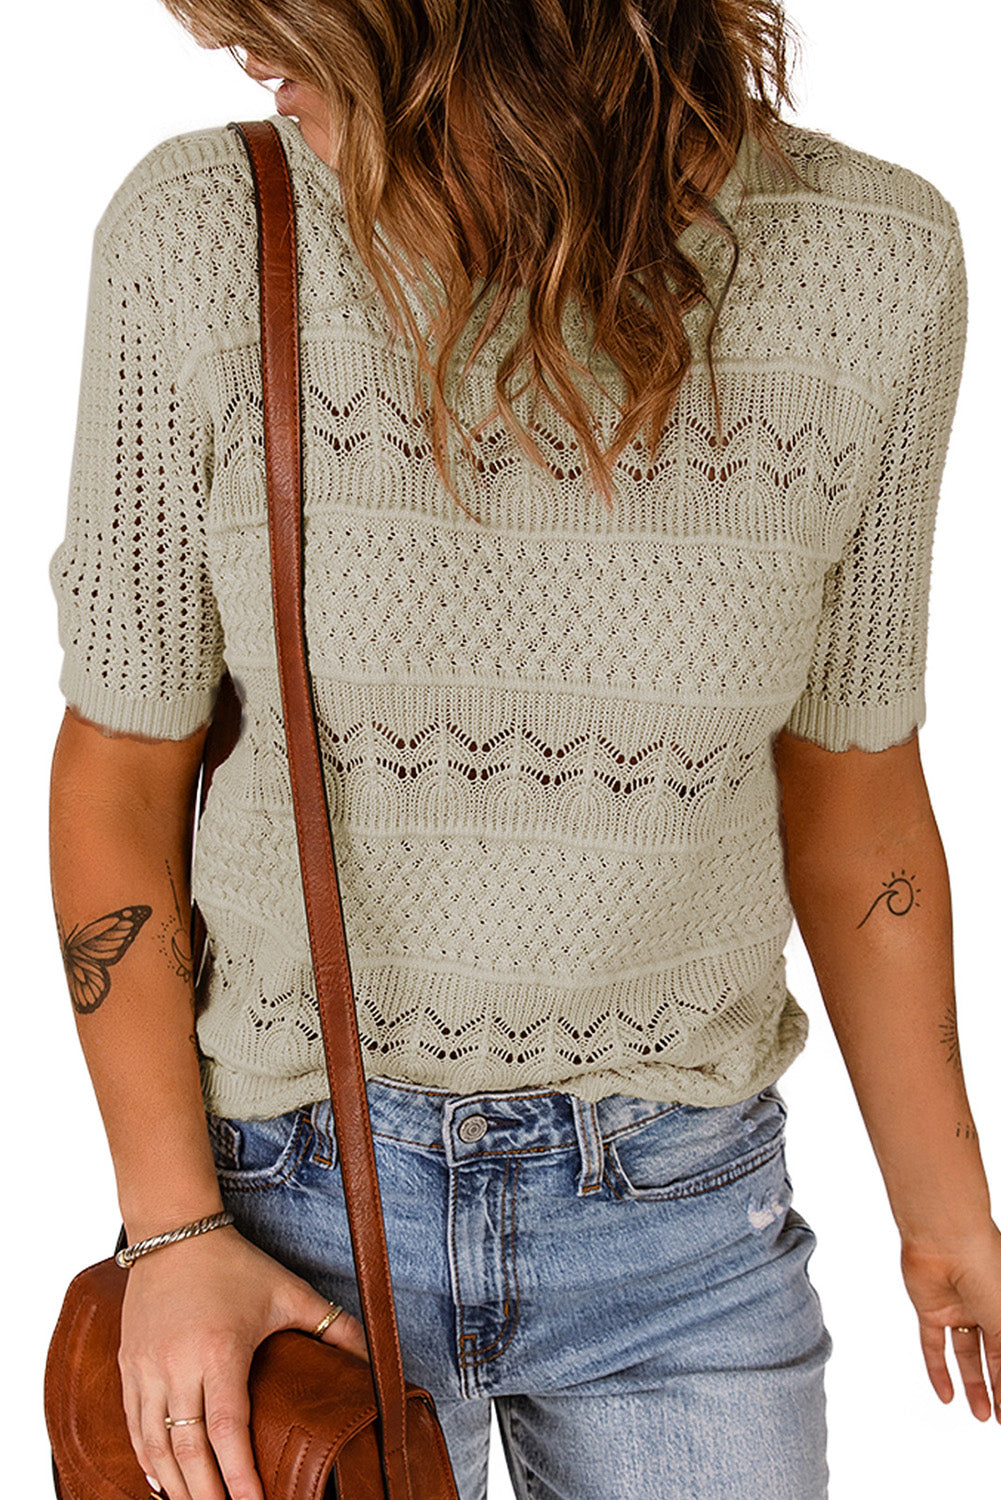 Apricot Crochet Hollow-out Short Sleeve T-shirt Tops & Tees JT's Designer Fashion